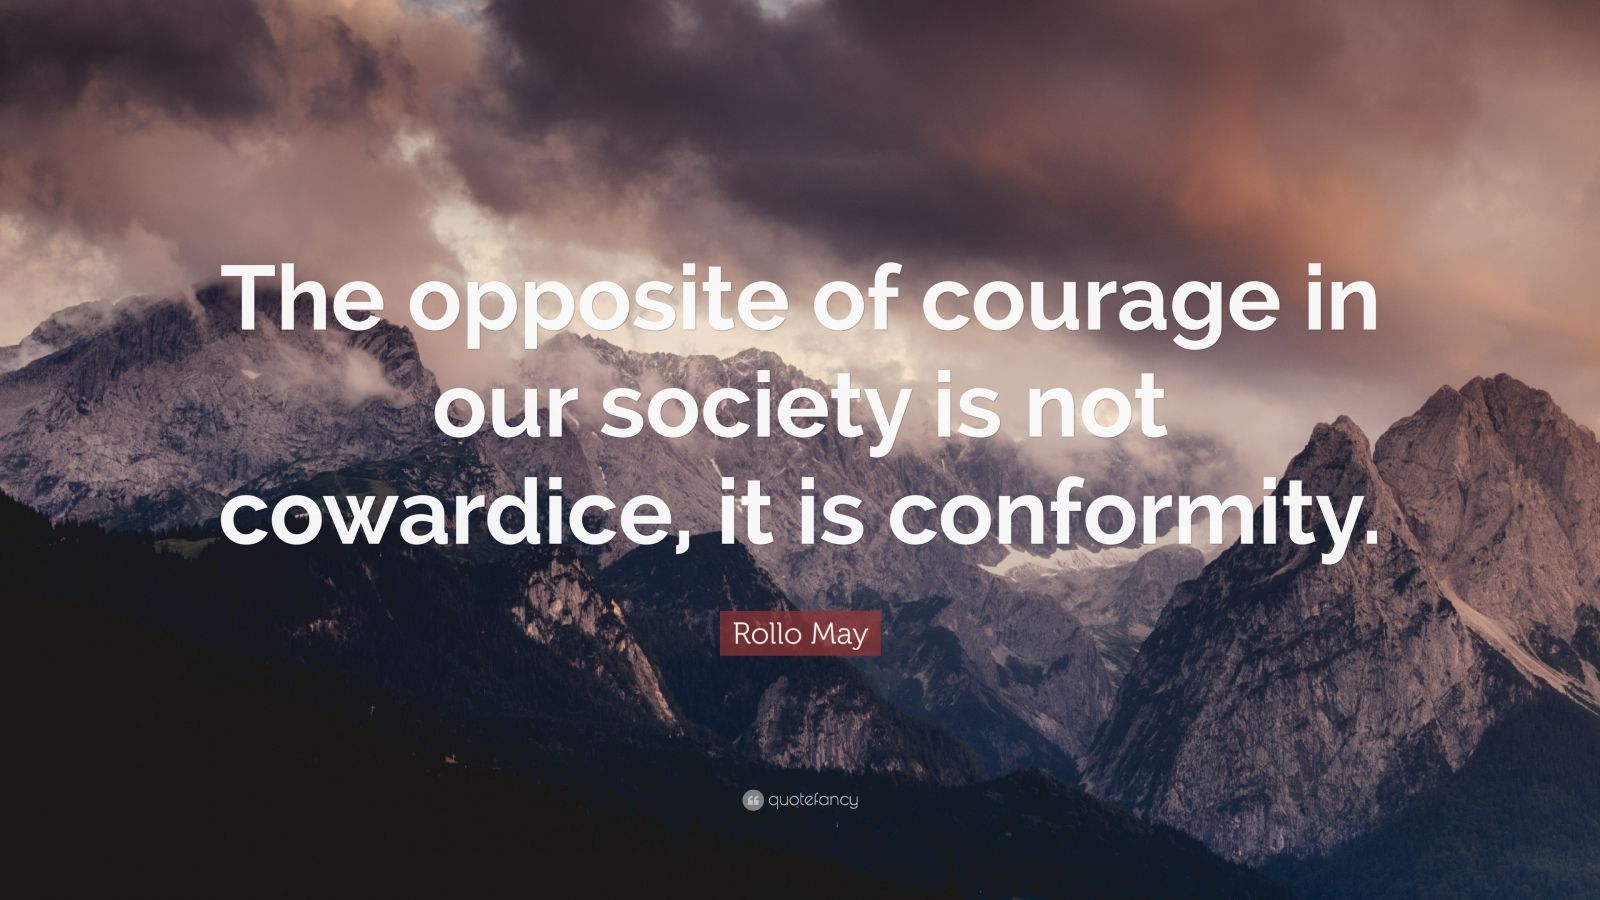 Rollo May Quote: “The opposite of courage in our society is not ...